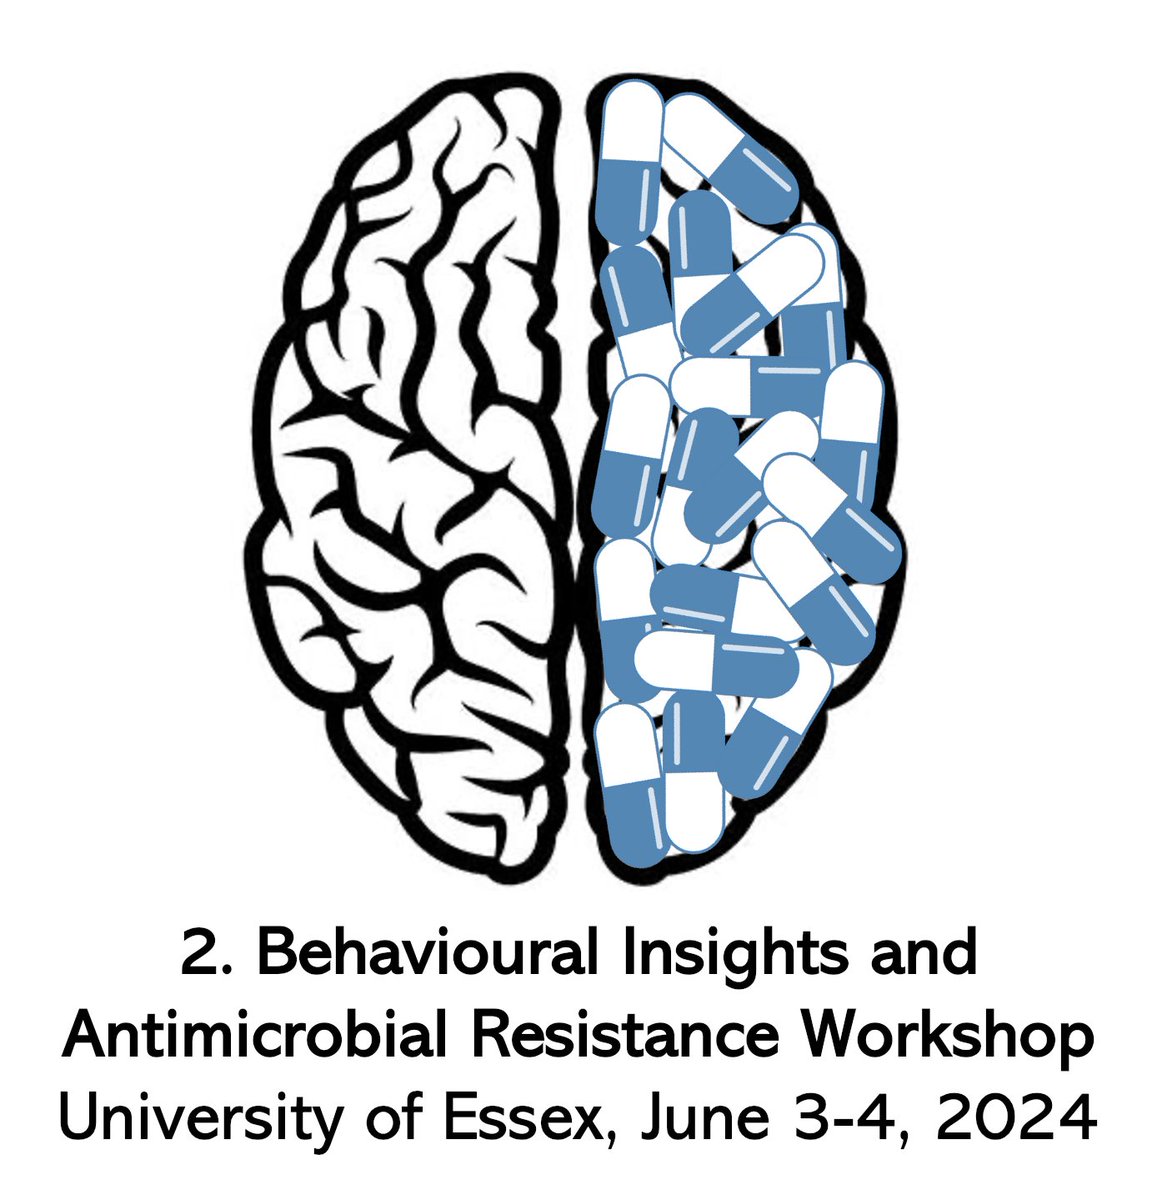 🚨CALL FOR SUBMISSIONS🚨 We invite submissions for the 2. BEHAVIOURAL INSIGHTS AND ANTIMICROBIAL RESISTANCE WORKSHOP, which will be held at the University of Essex, June 3-4, 2024. For more information and submissions, visit: a-bc.network/workshop2.html